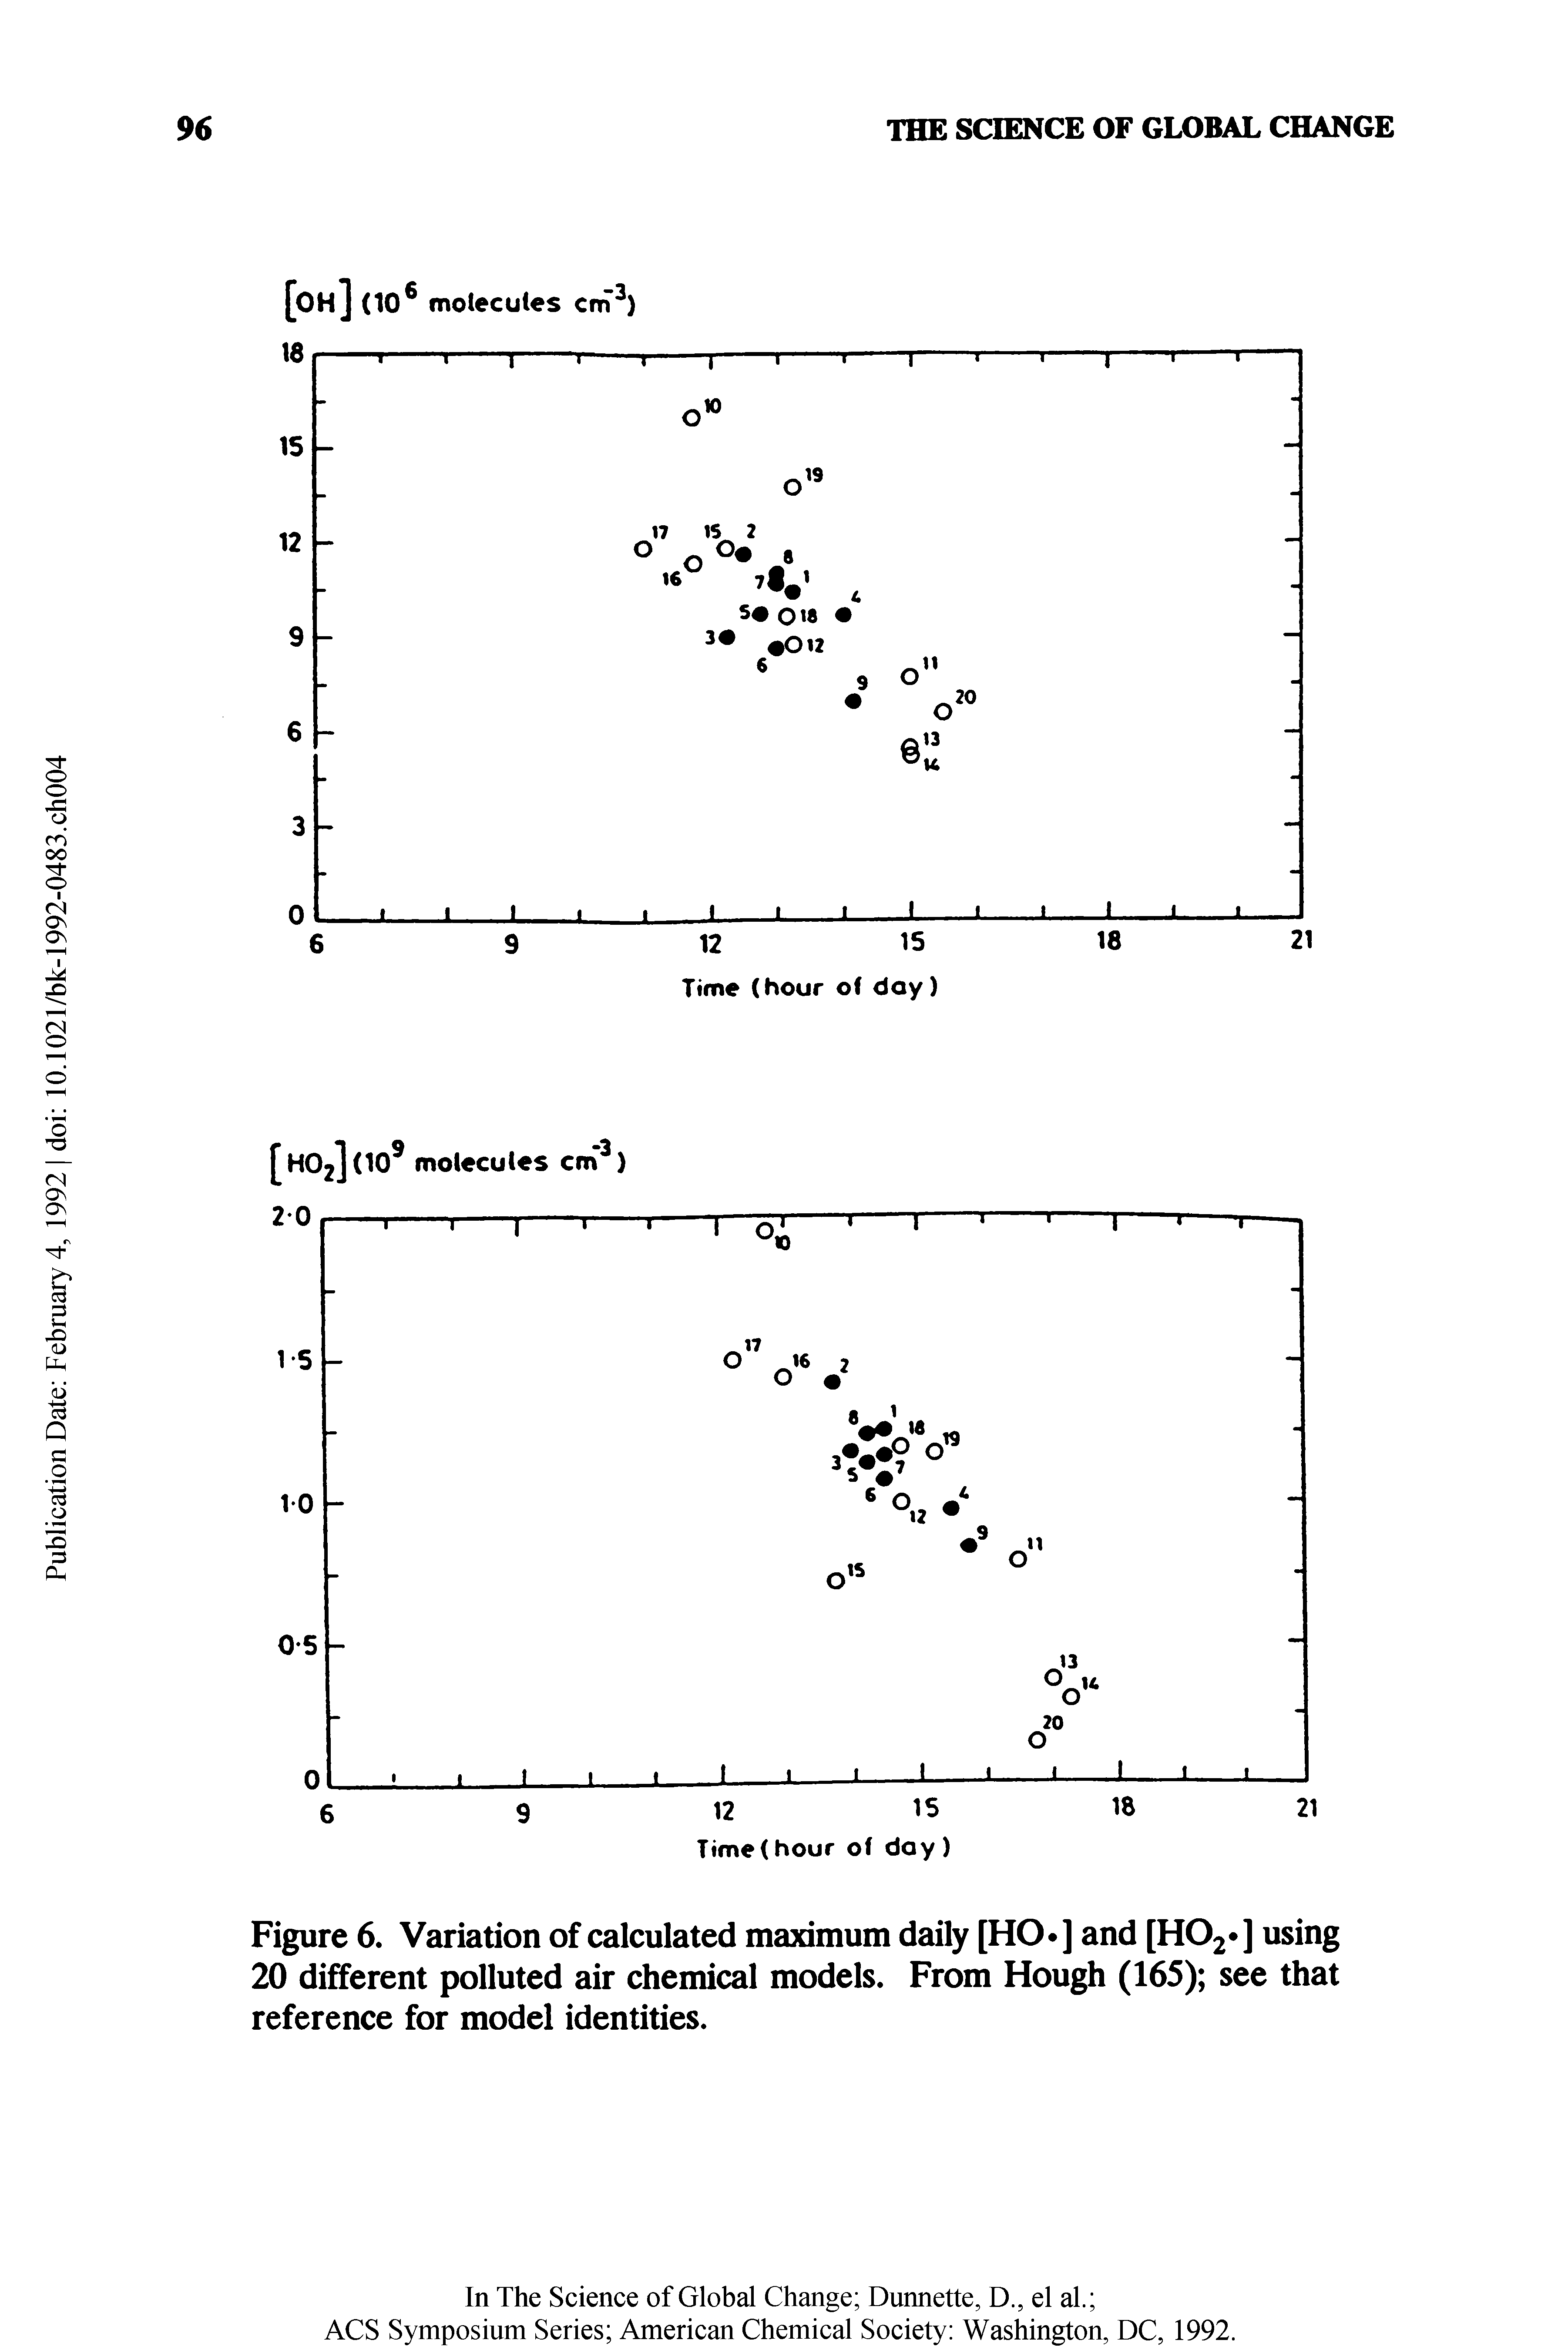 Figure 6. Variation of calculated maximum daily [HO ] and [H02 ] using 20 different polluted air chemical models. From Hough (165) see that reference for model identities.